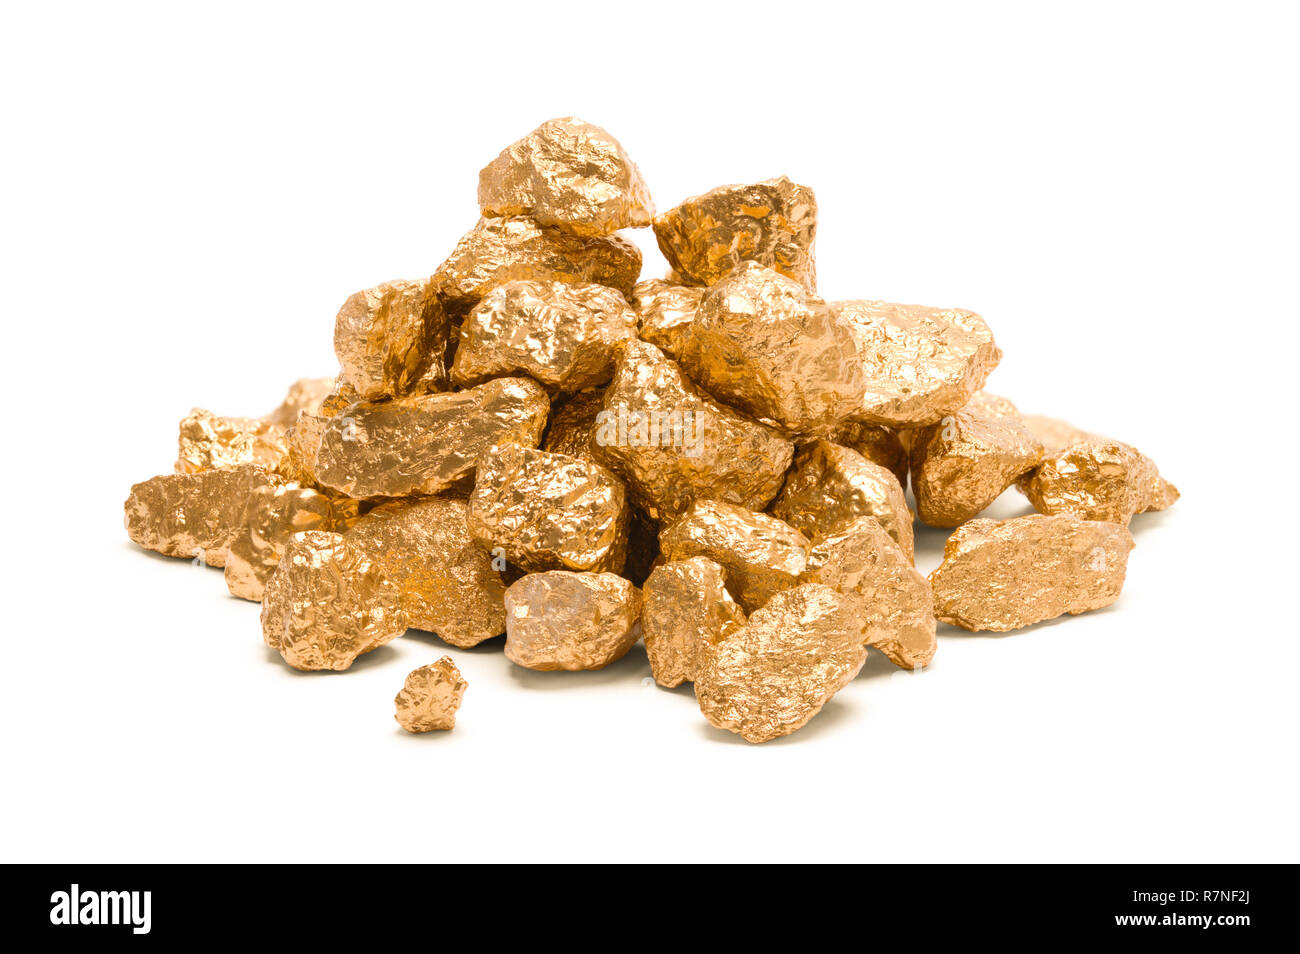 Pile of Gold Nuggets Isolated on White Background. Stock Photo